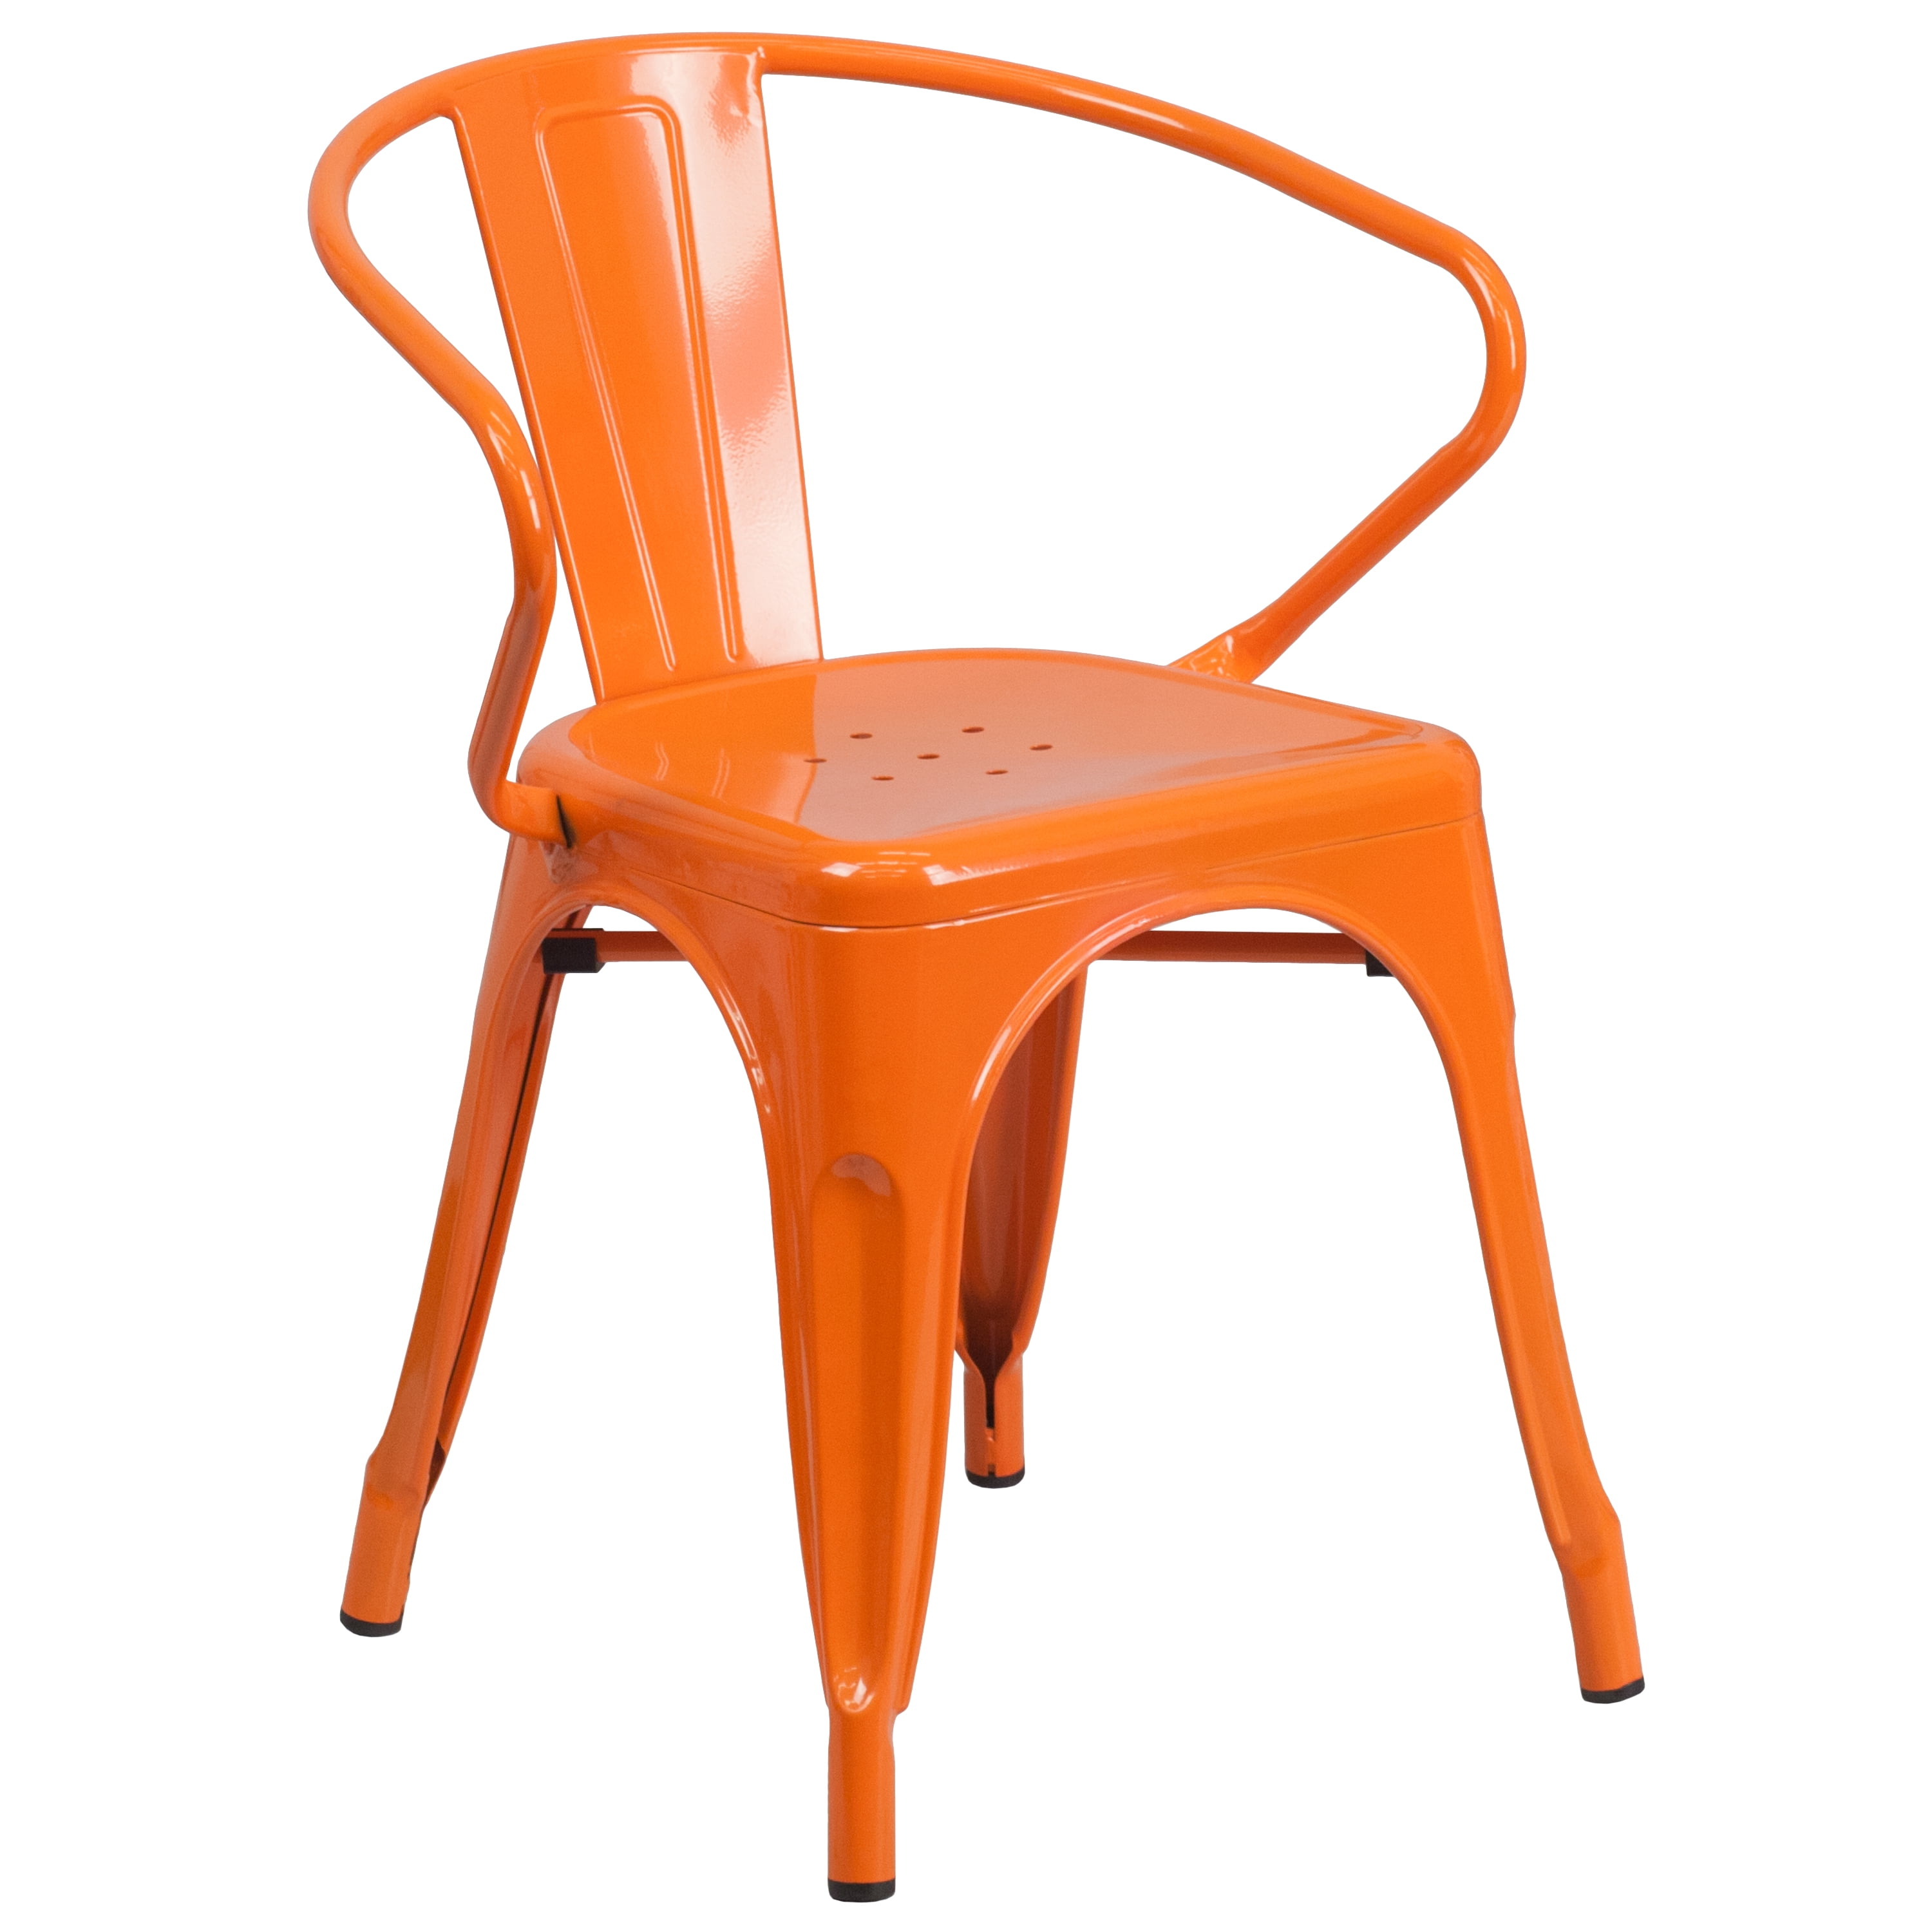 Flash Furniture Commercial Grade Orange Metal Indoor-Outdoor Chair with Arms - image 2 of 12